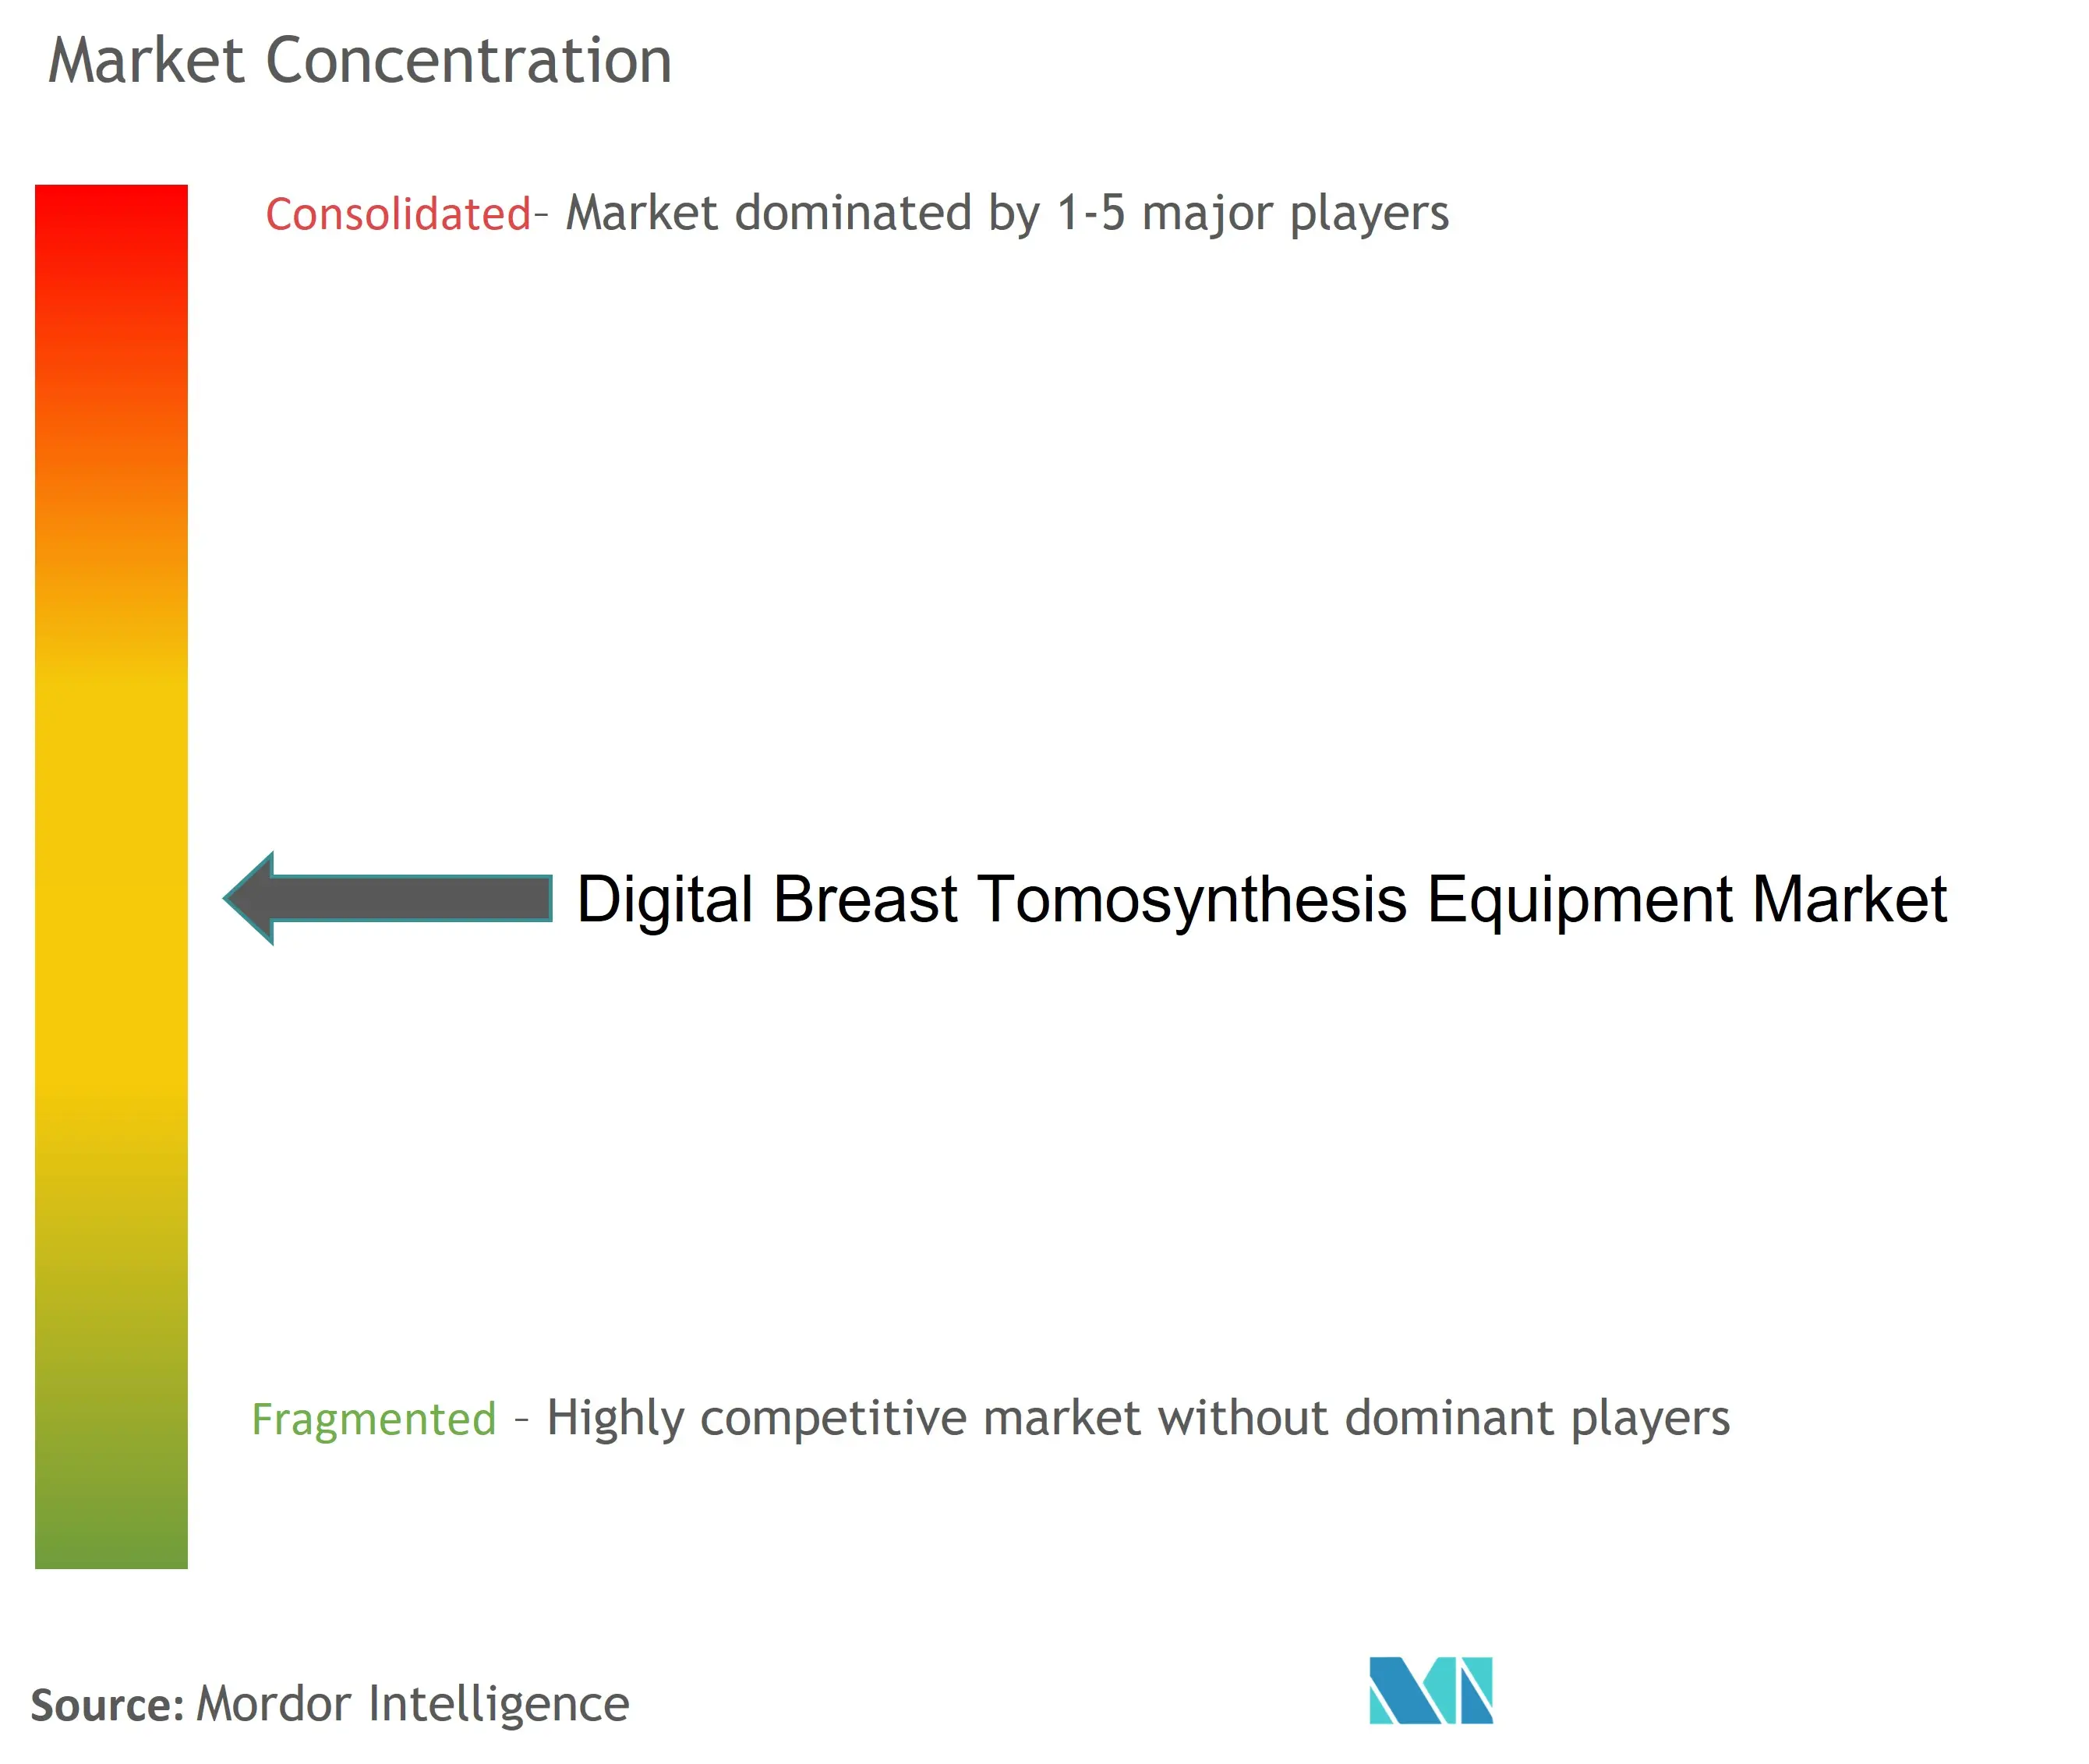 Global Digital Breast Tomosynthesis Equipment Market Concentration